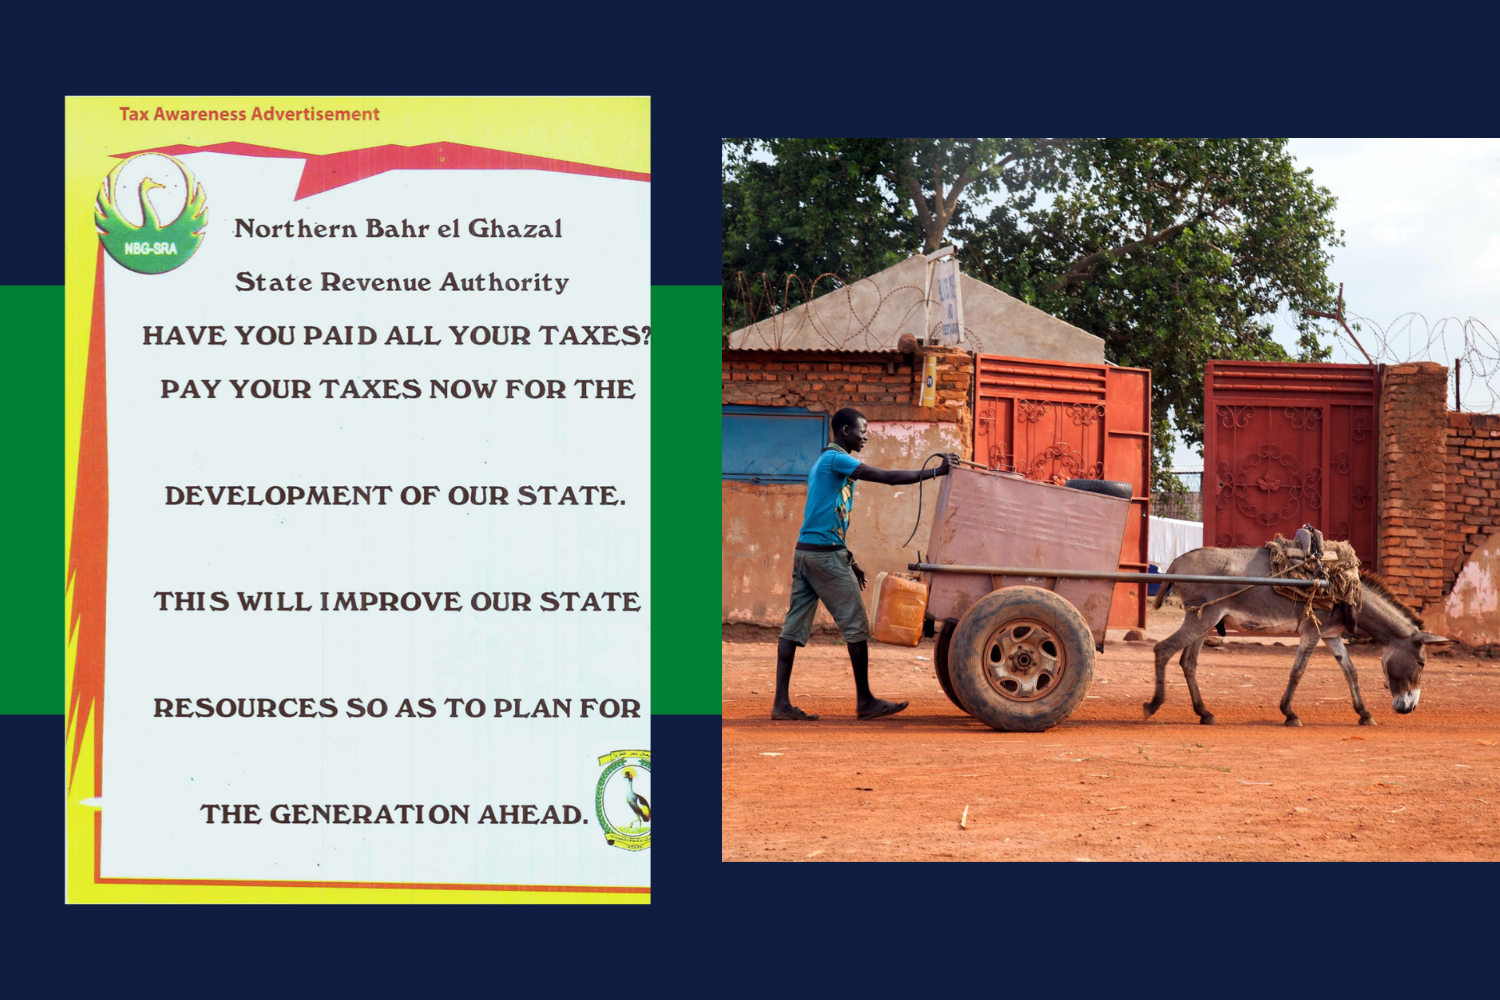 Transitioning from Taxation without Representation in South Sudan